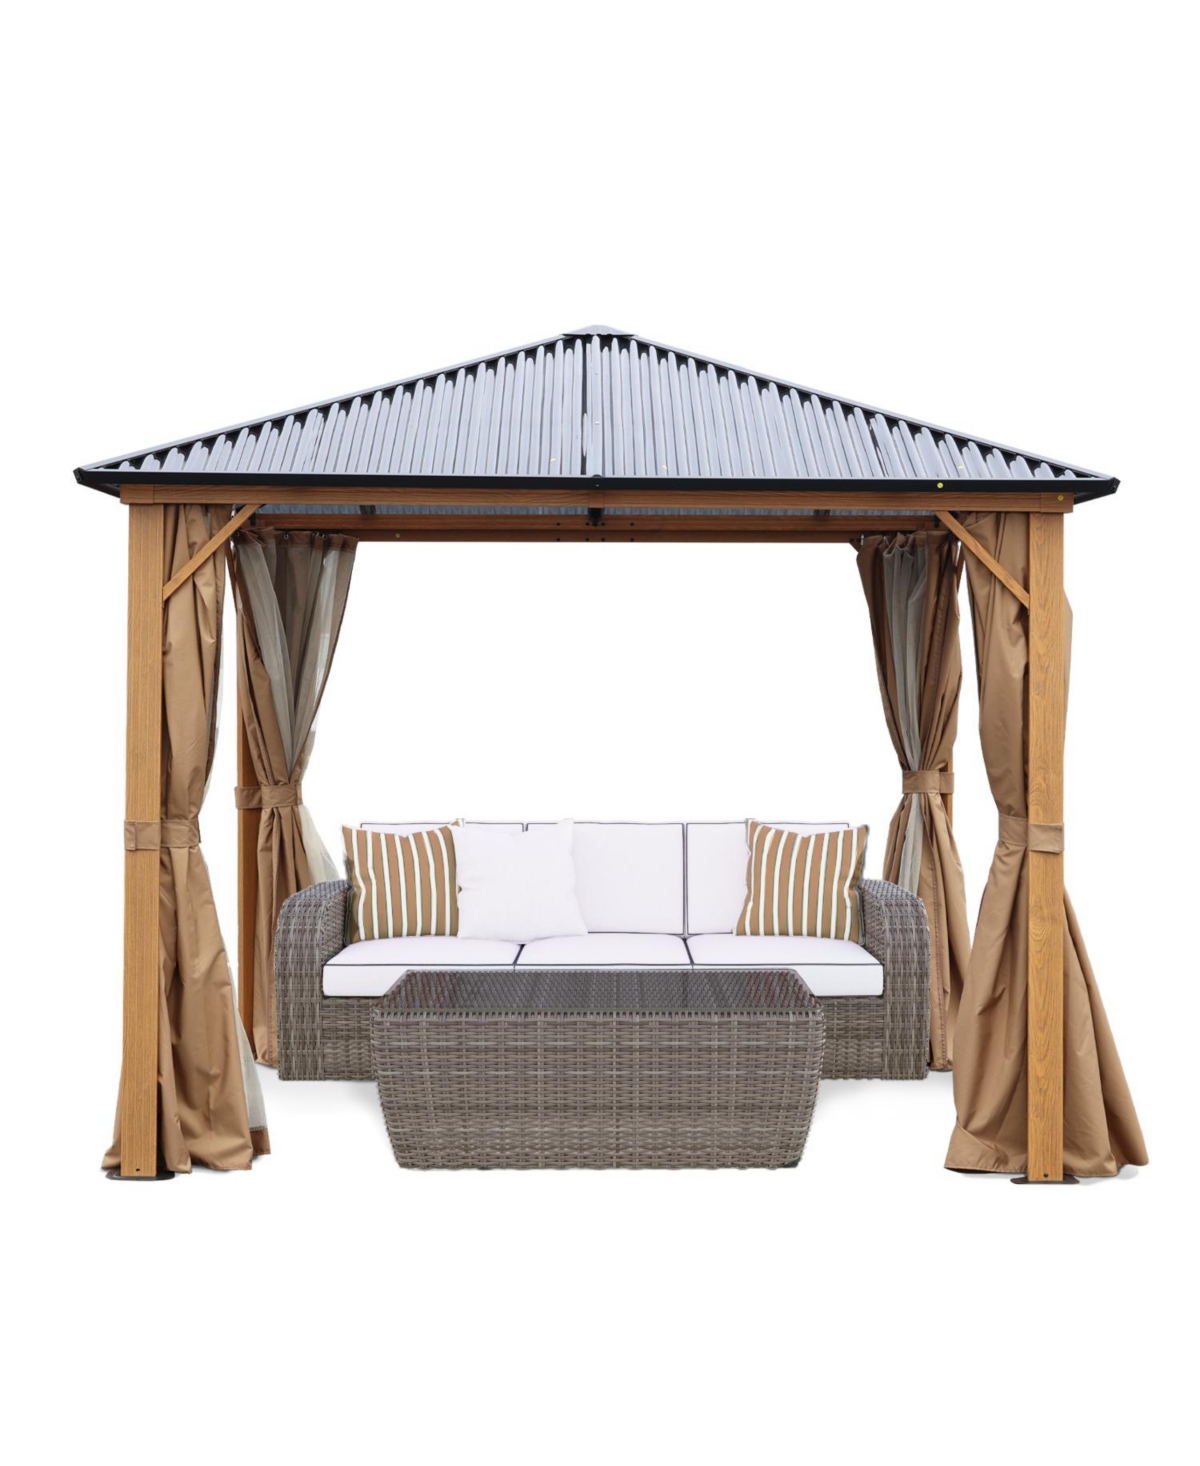 10 x 10 ft. Wooden Finish Coated Aluminum Frame Gazebo with Polycarbonate Roof, Outdoor Gazebos with Curtains and Nettings, for Patio Backyard